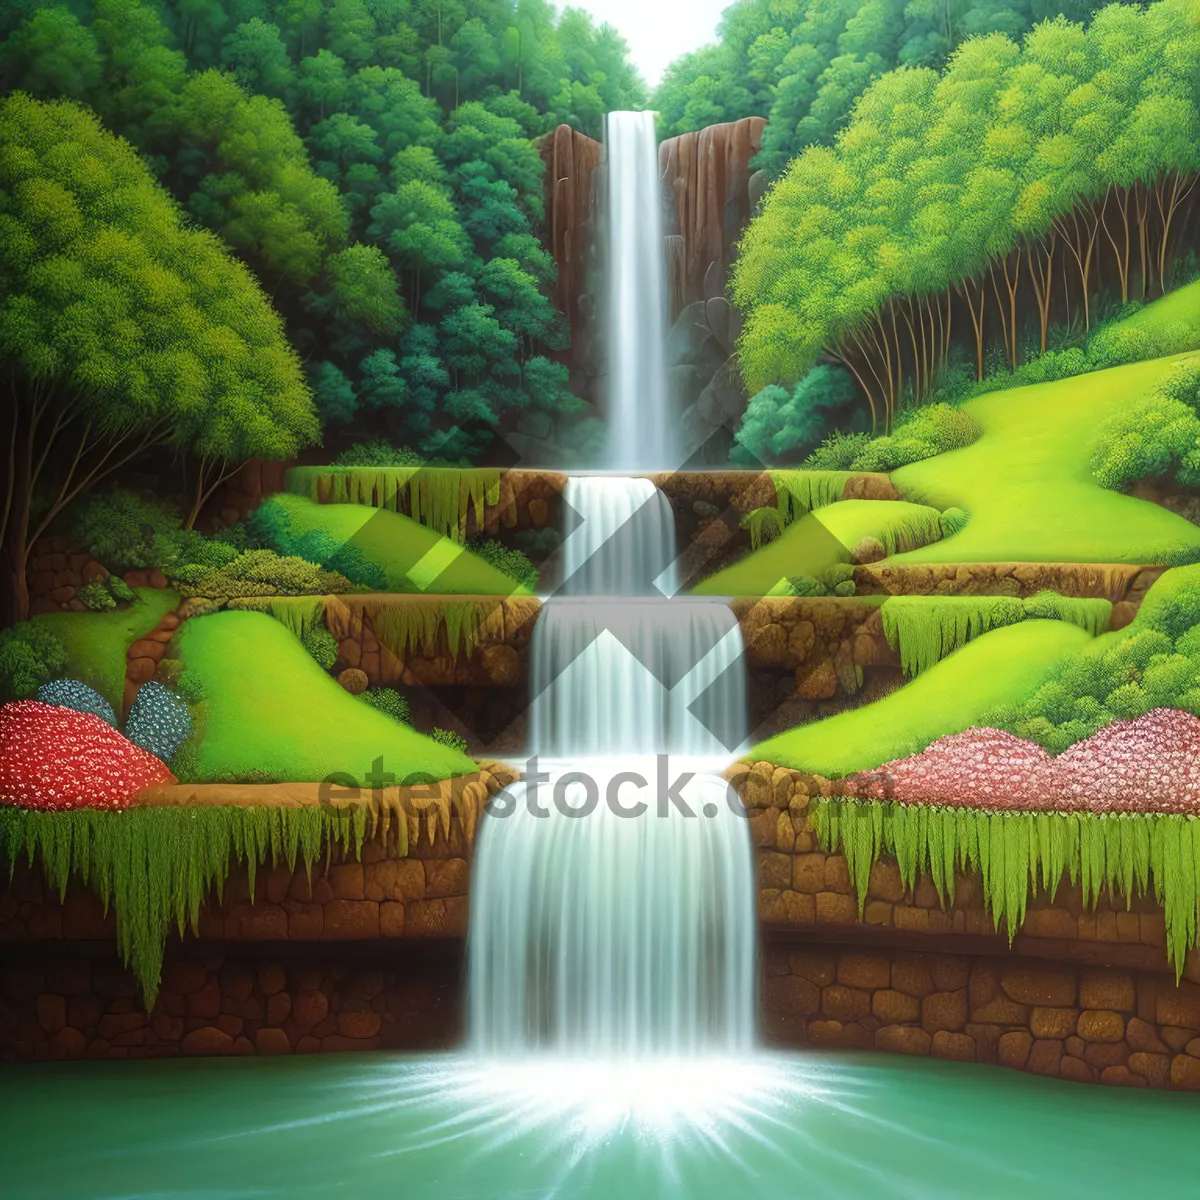 Picture of Serene Waterfall Amidst Lush Park Landscape